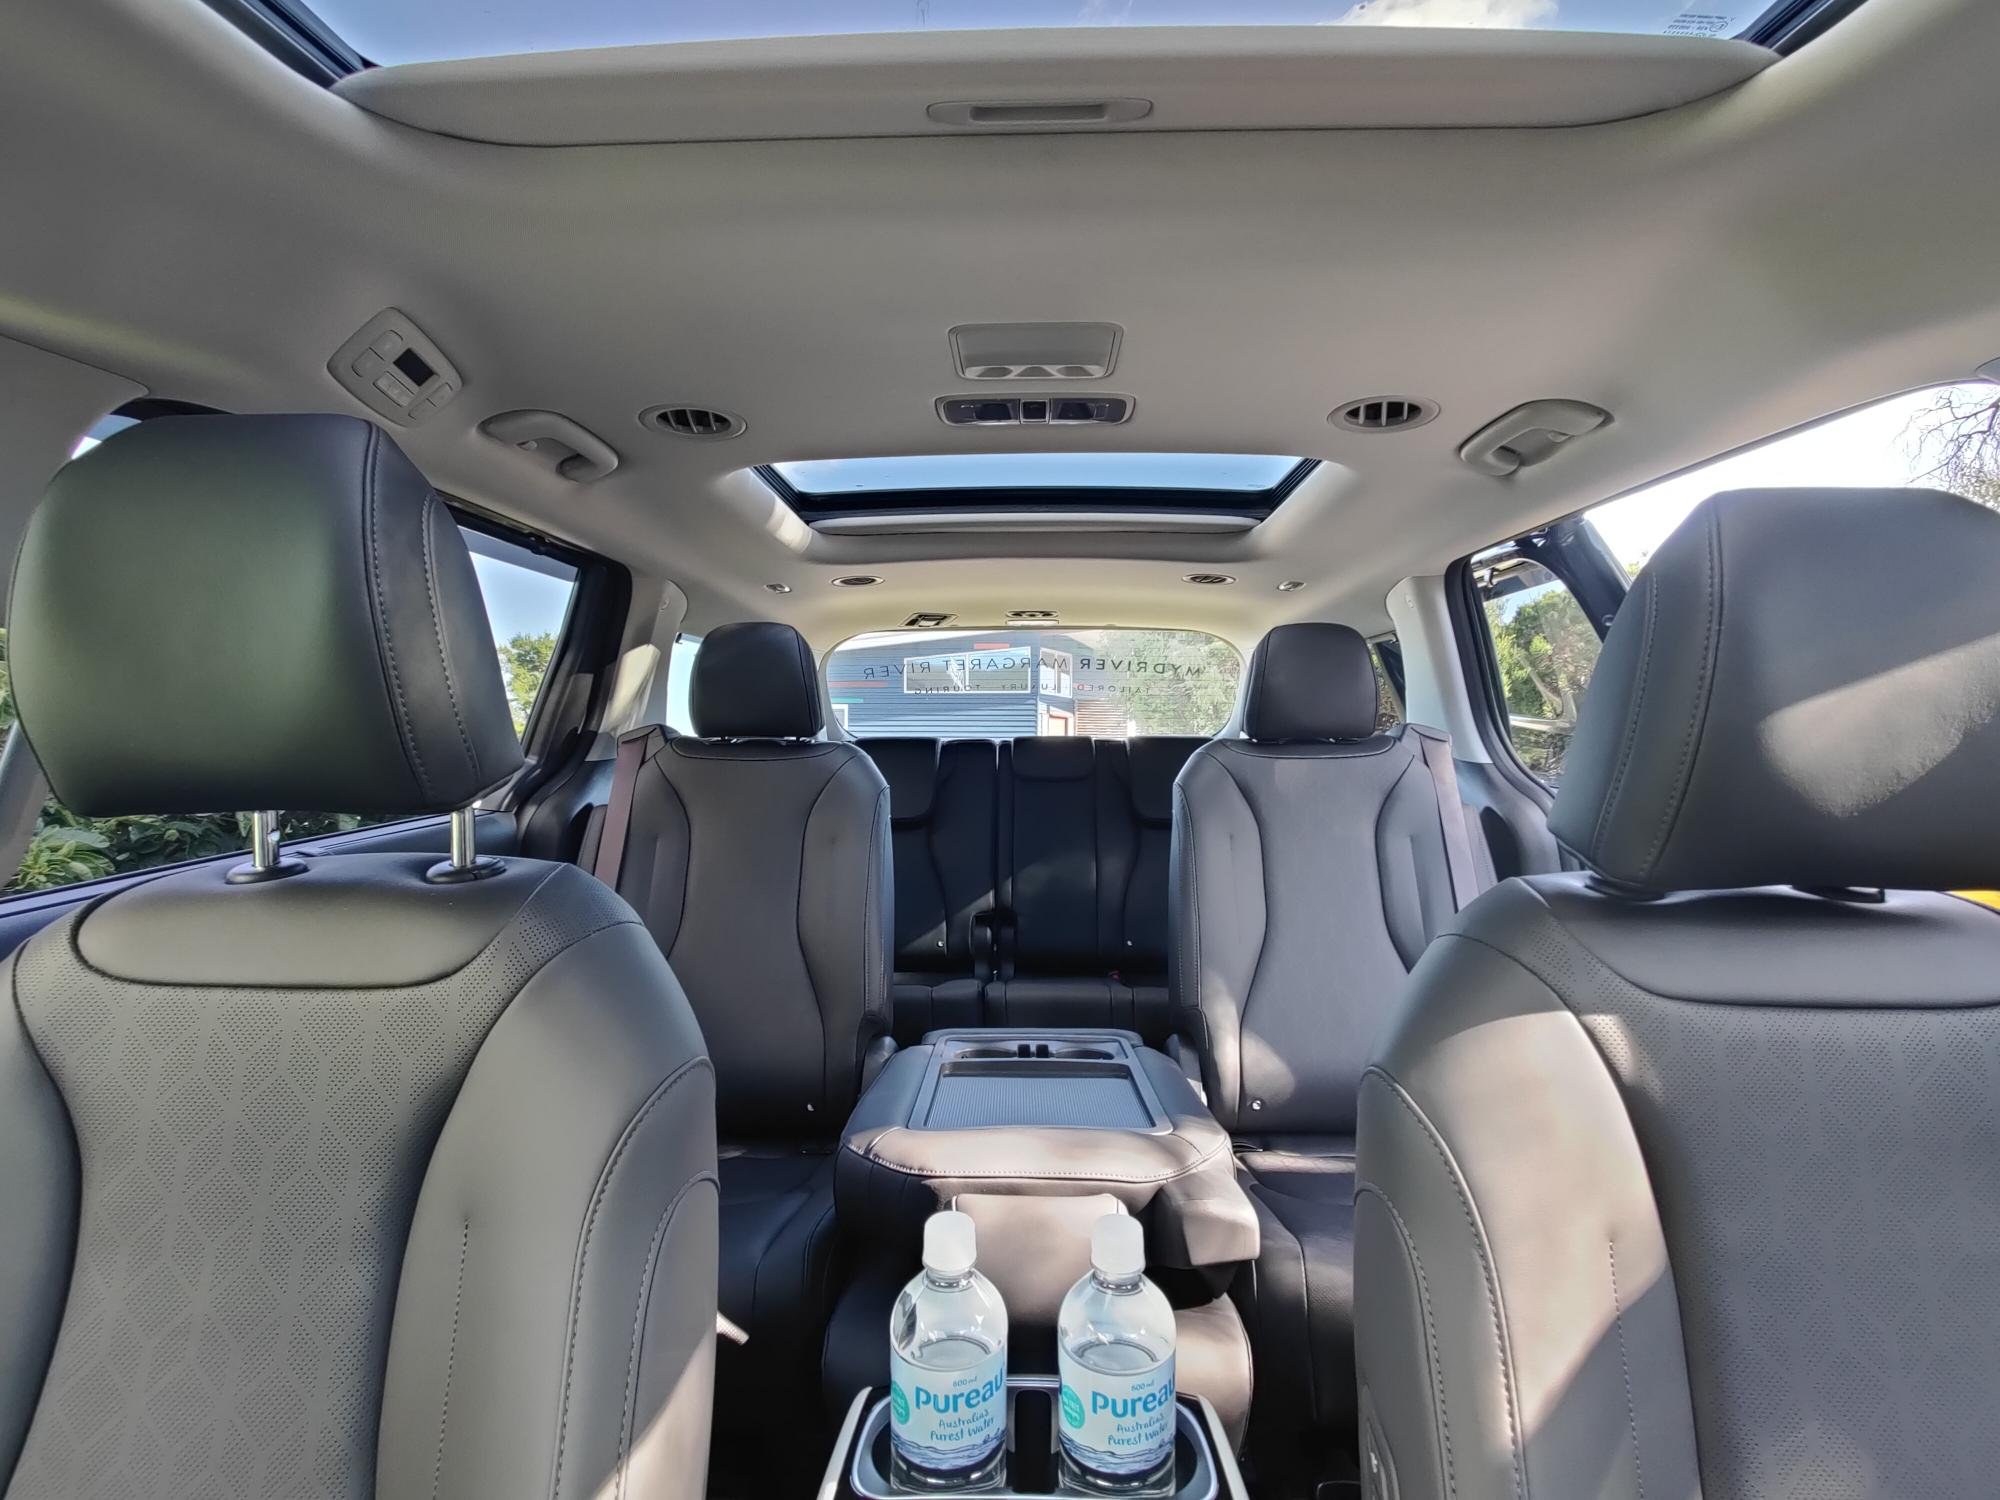 Featuring a luxurious interior for eight, lavishly equipped with next-generation Kia technology, the Carnival allows passengers to travel in grand comfort and style!